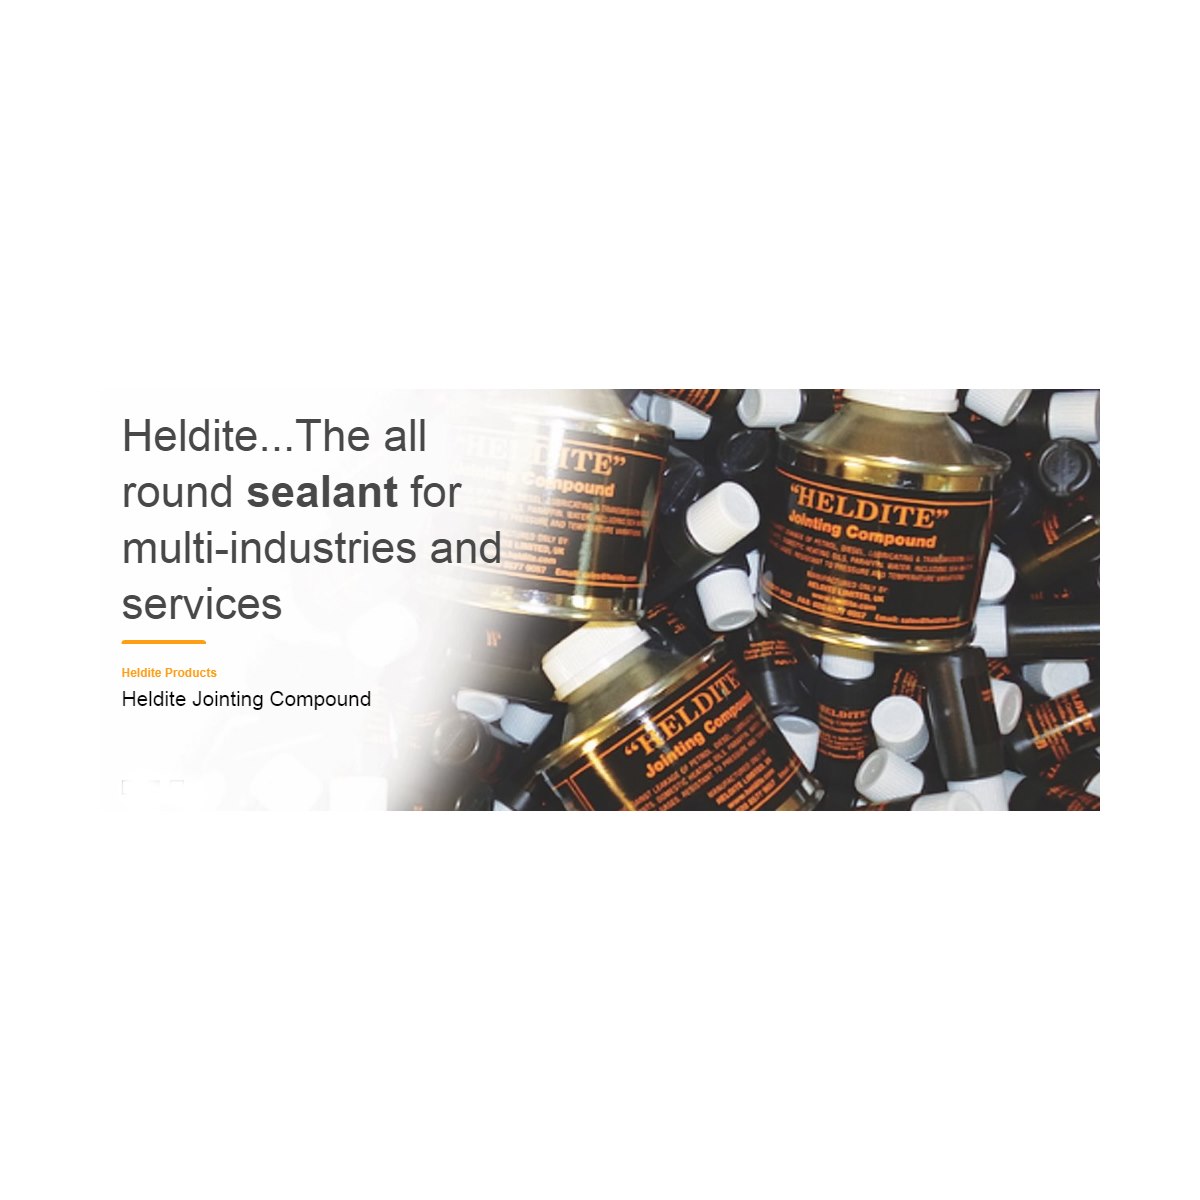 Where to Buy Heldite Jointing Compound